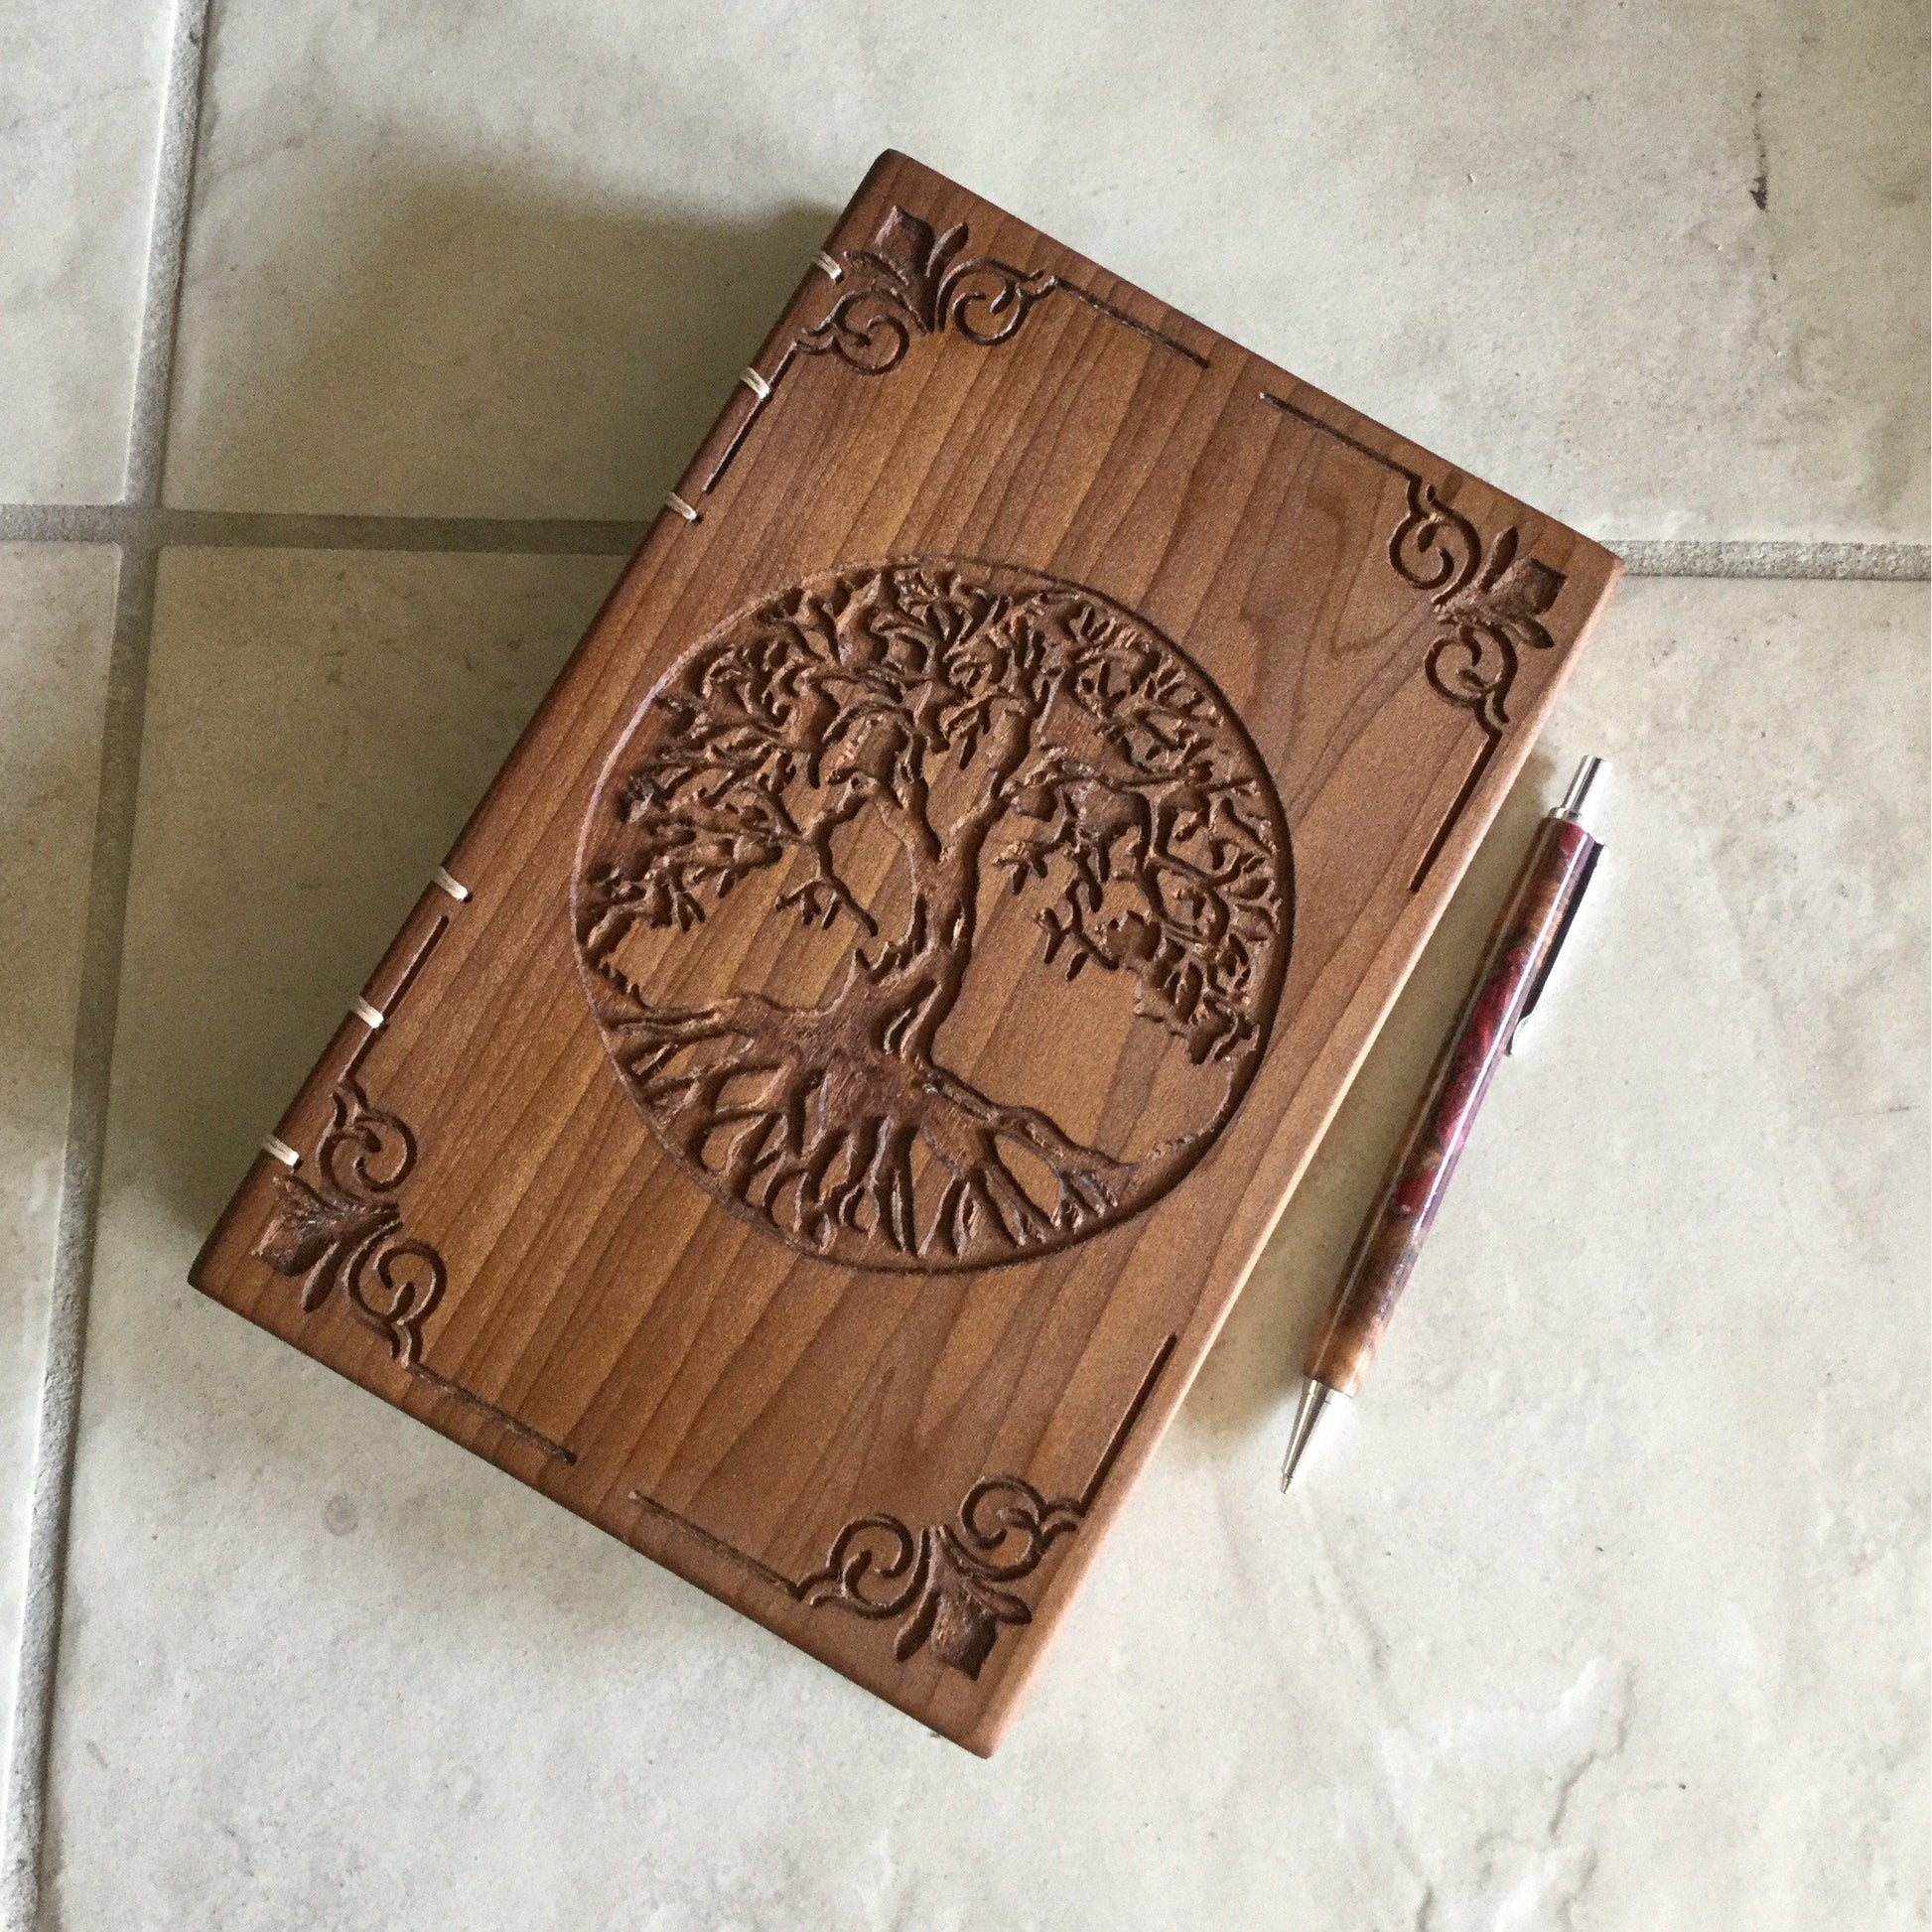 https://8thlinecreations.com/cdn/shop/products/personalized-journal-tree-of-lifediaries-mothers-day-gift-wooden-booknotebooks-personal-diary-unique-gifts-s-poplar-coptic-stitch-custom-carved-diaries-guest-books-journa-430554.jpg?v=1702308543&width=1946